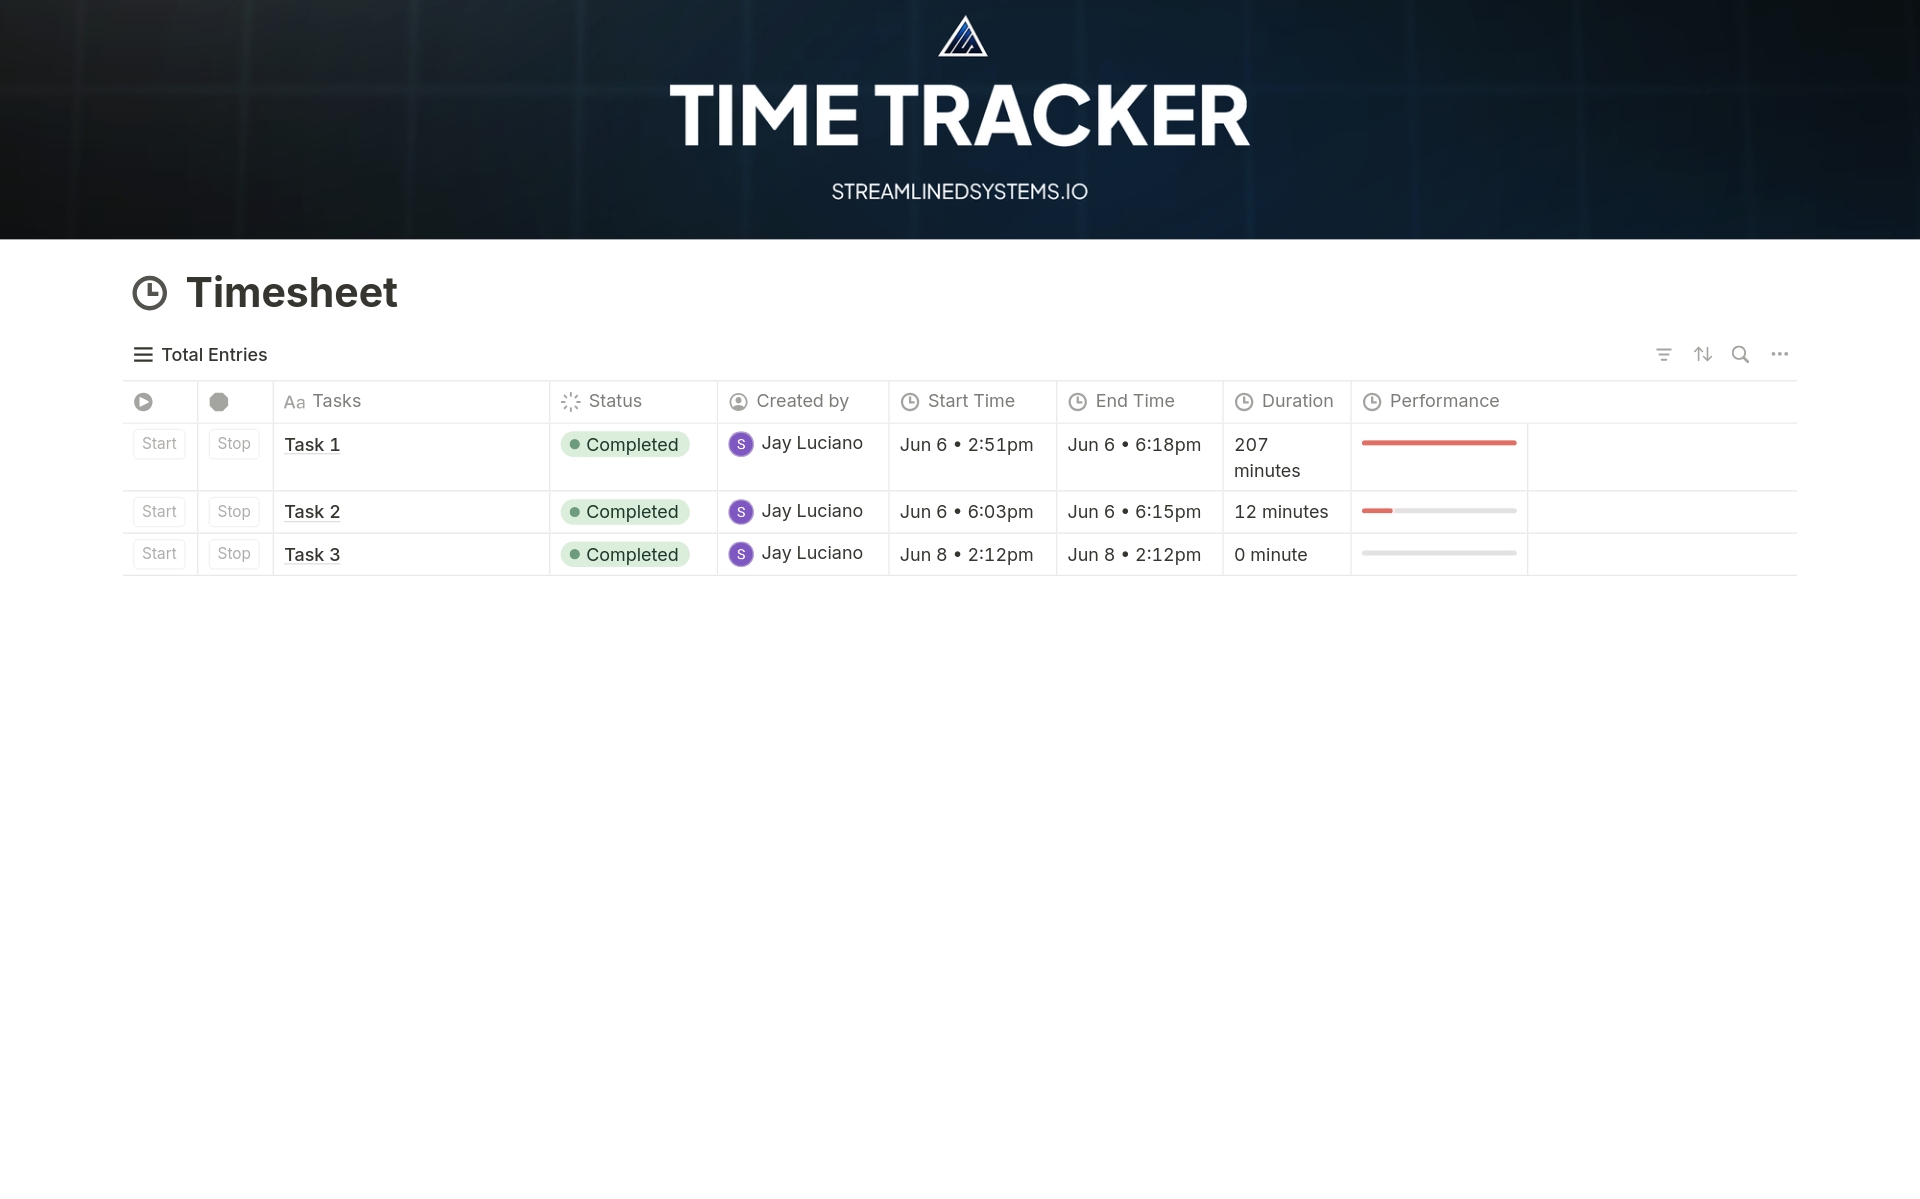 A template preview for Time Tracker